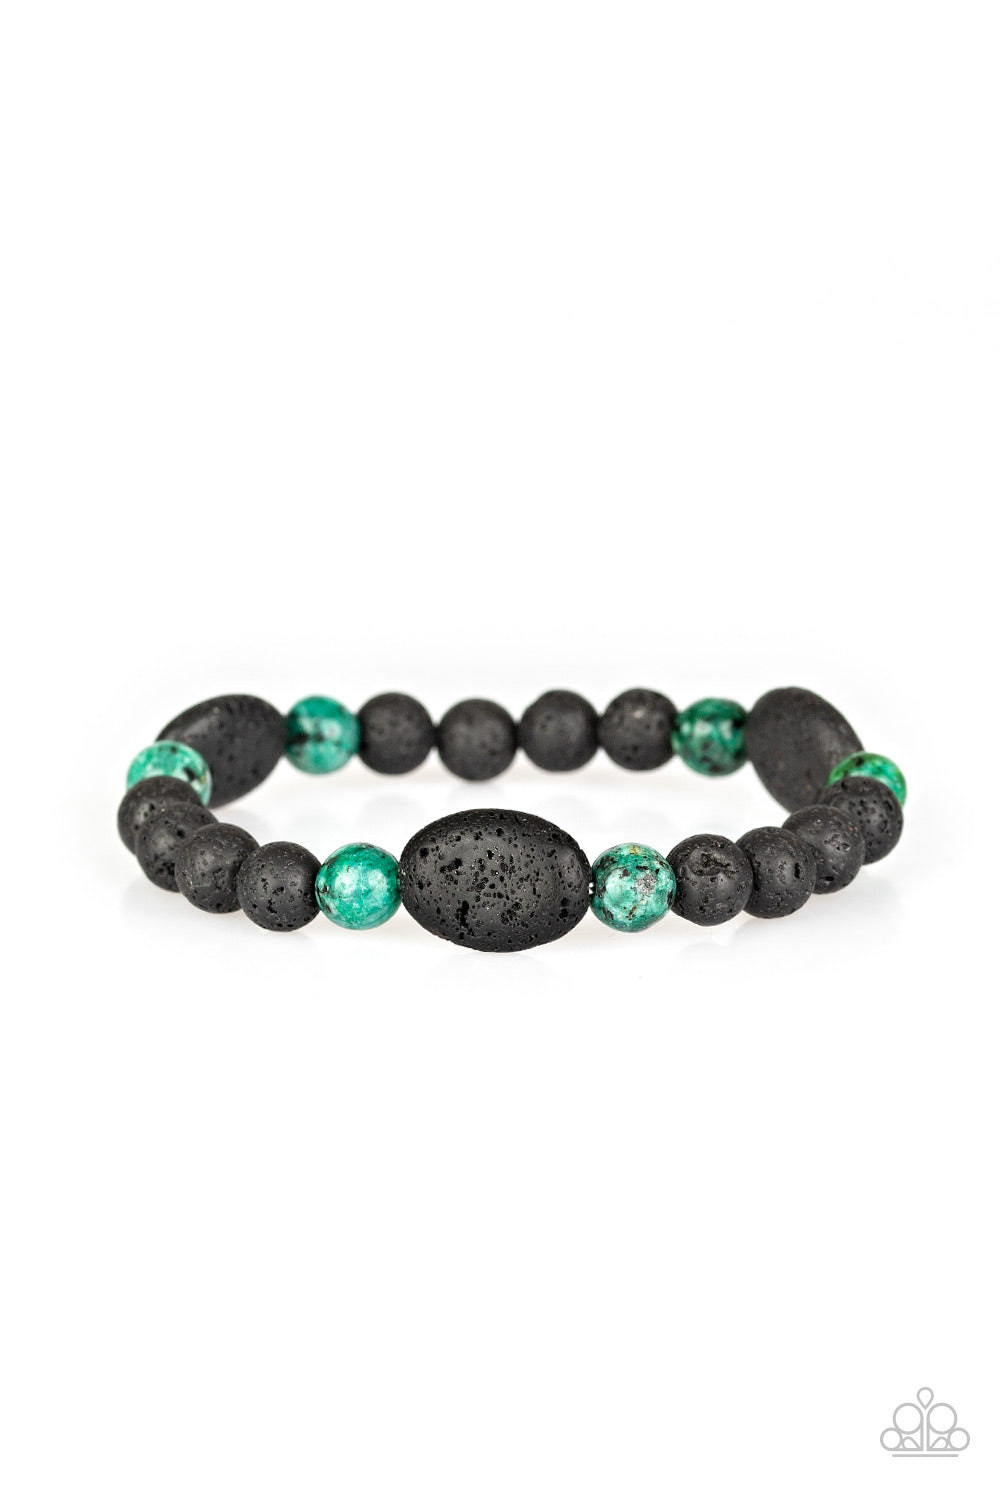 A HUNDRED AND ZEN PERCENT - GREEN SPECKLED STONE LAVA BEADS STRETCH BRACELET